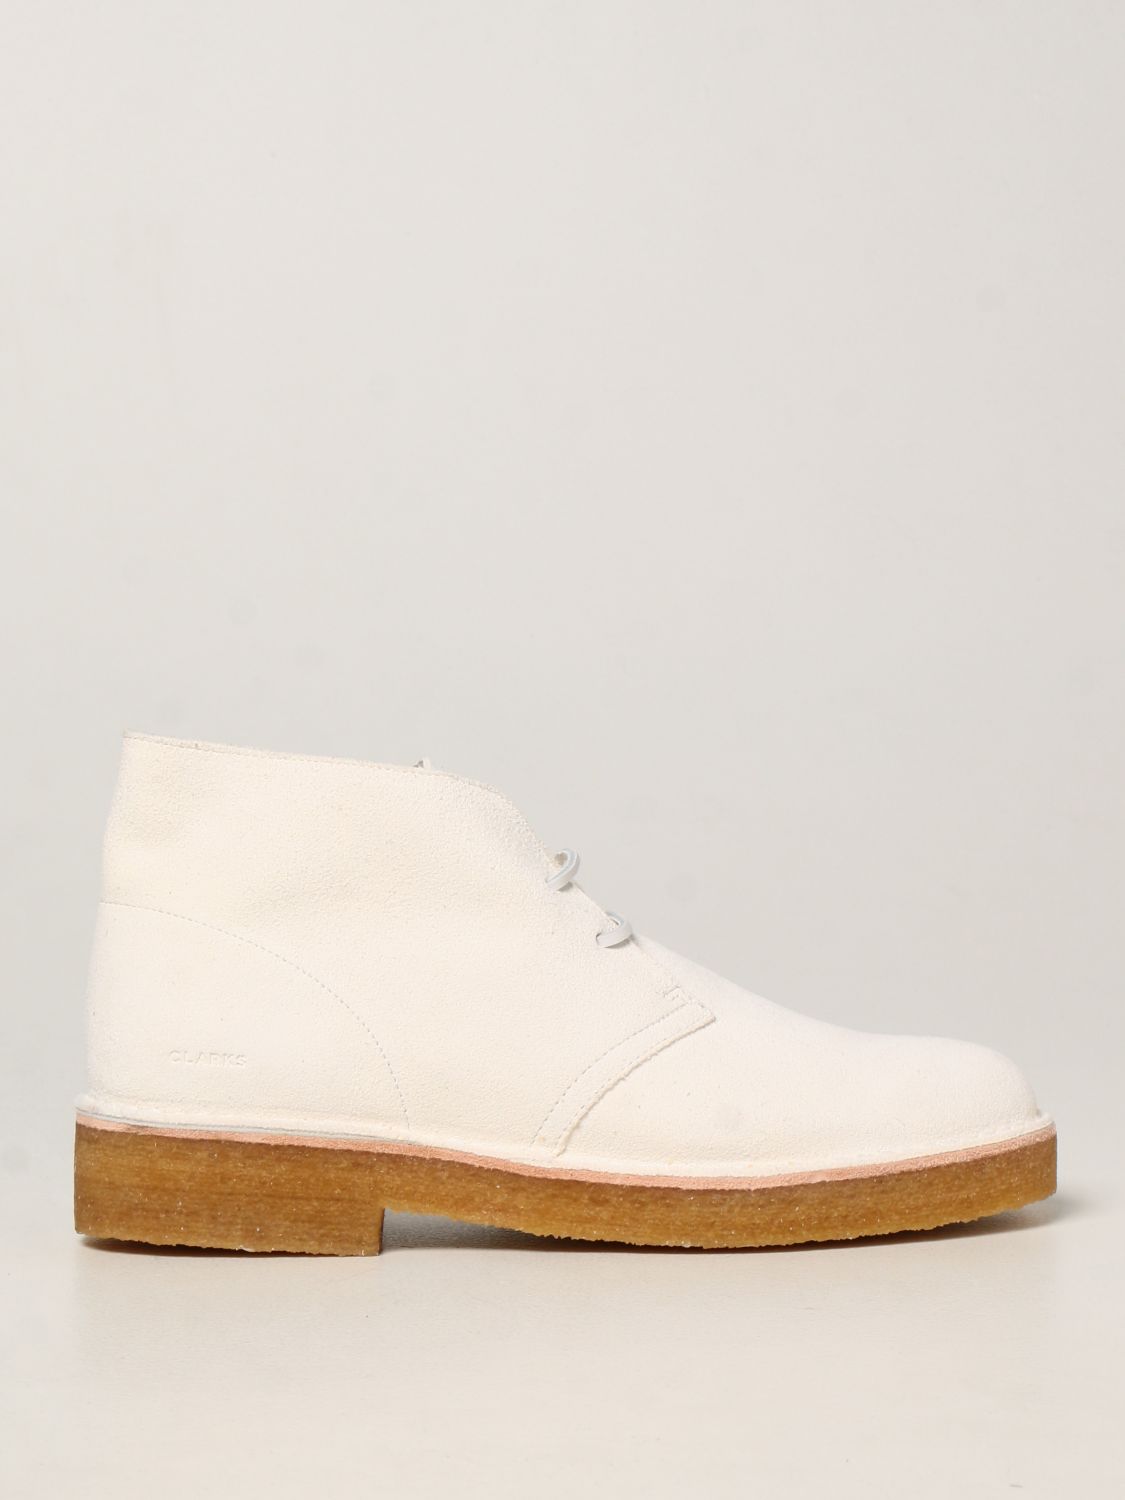 Snart Opaque slå Clarks Outlet: chukka boots for men - White | Clarks chukka boots 155608  online on GIGLIO.COM